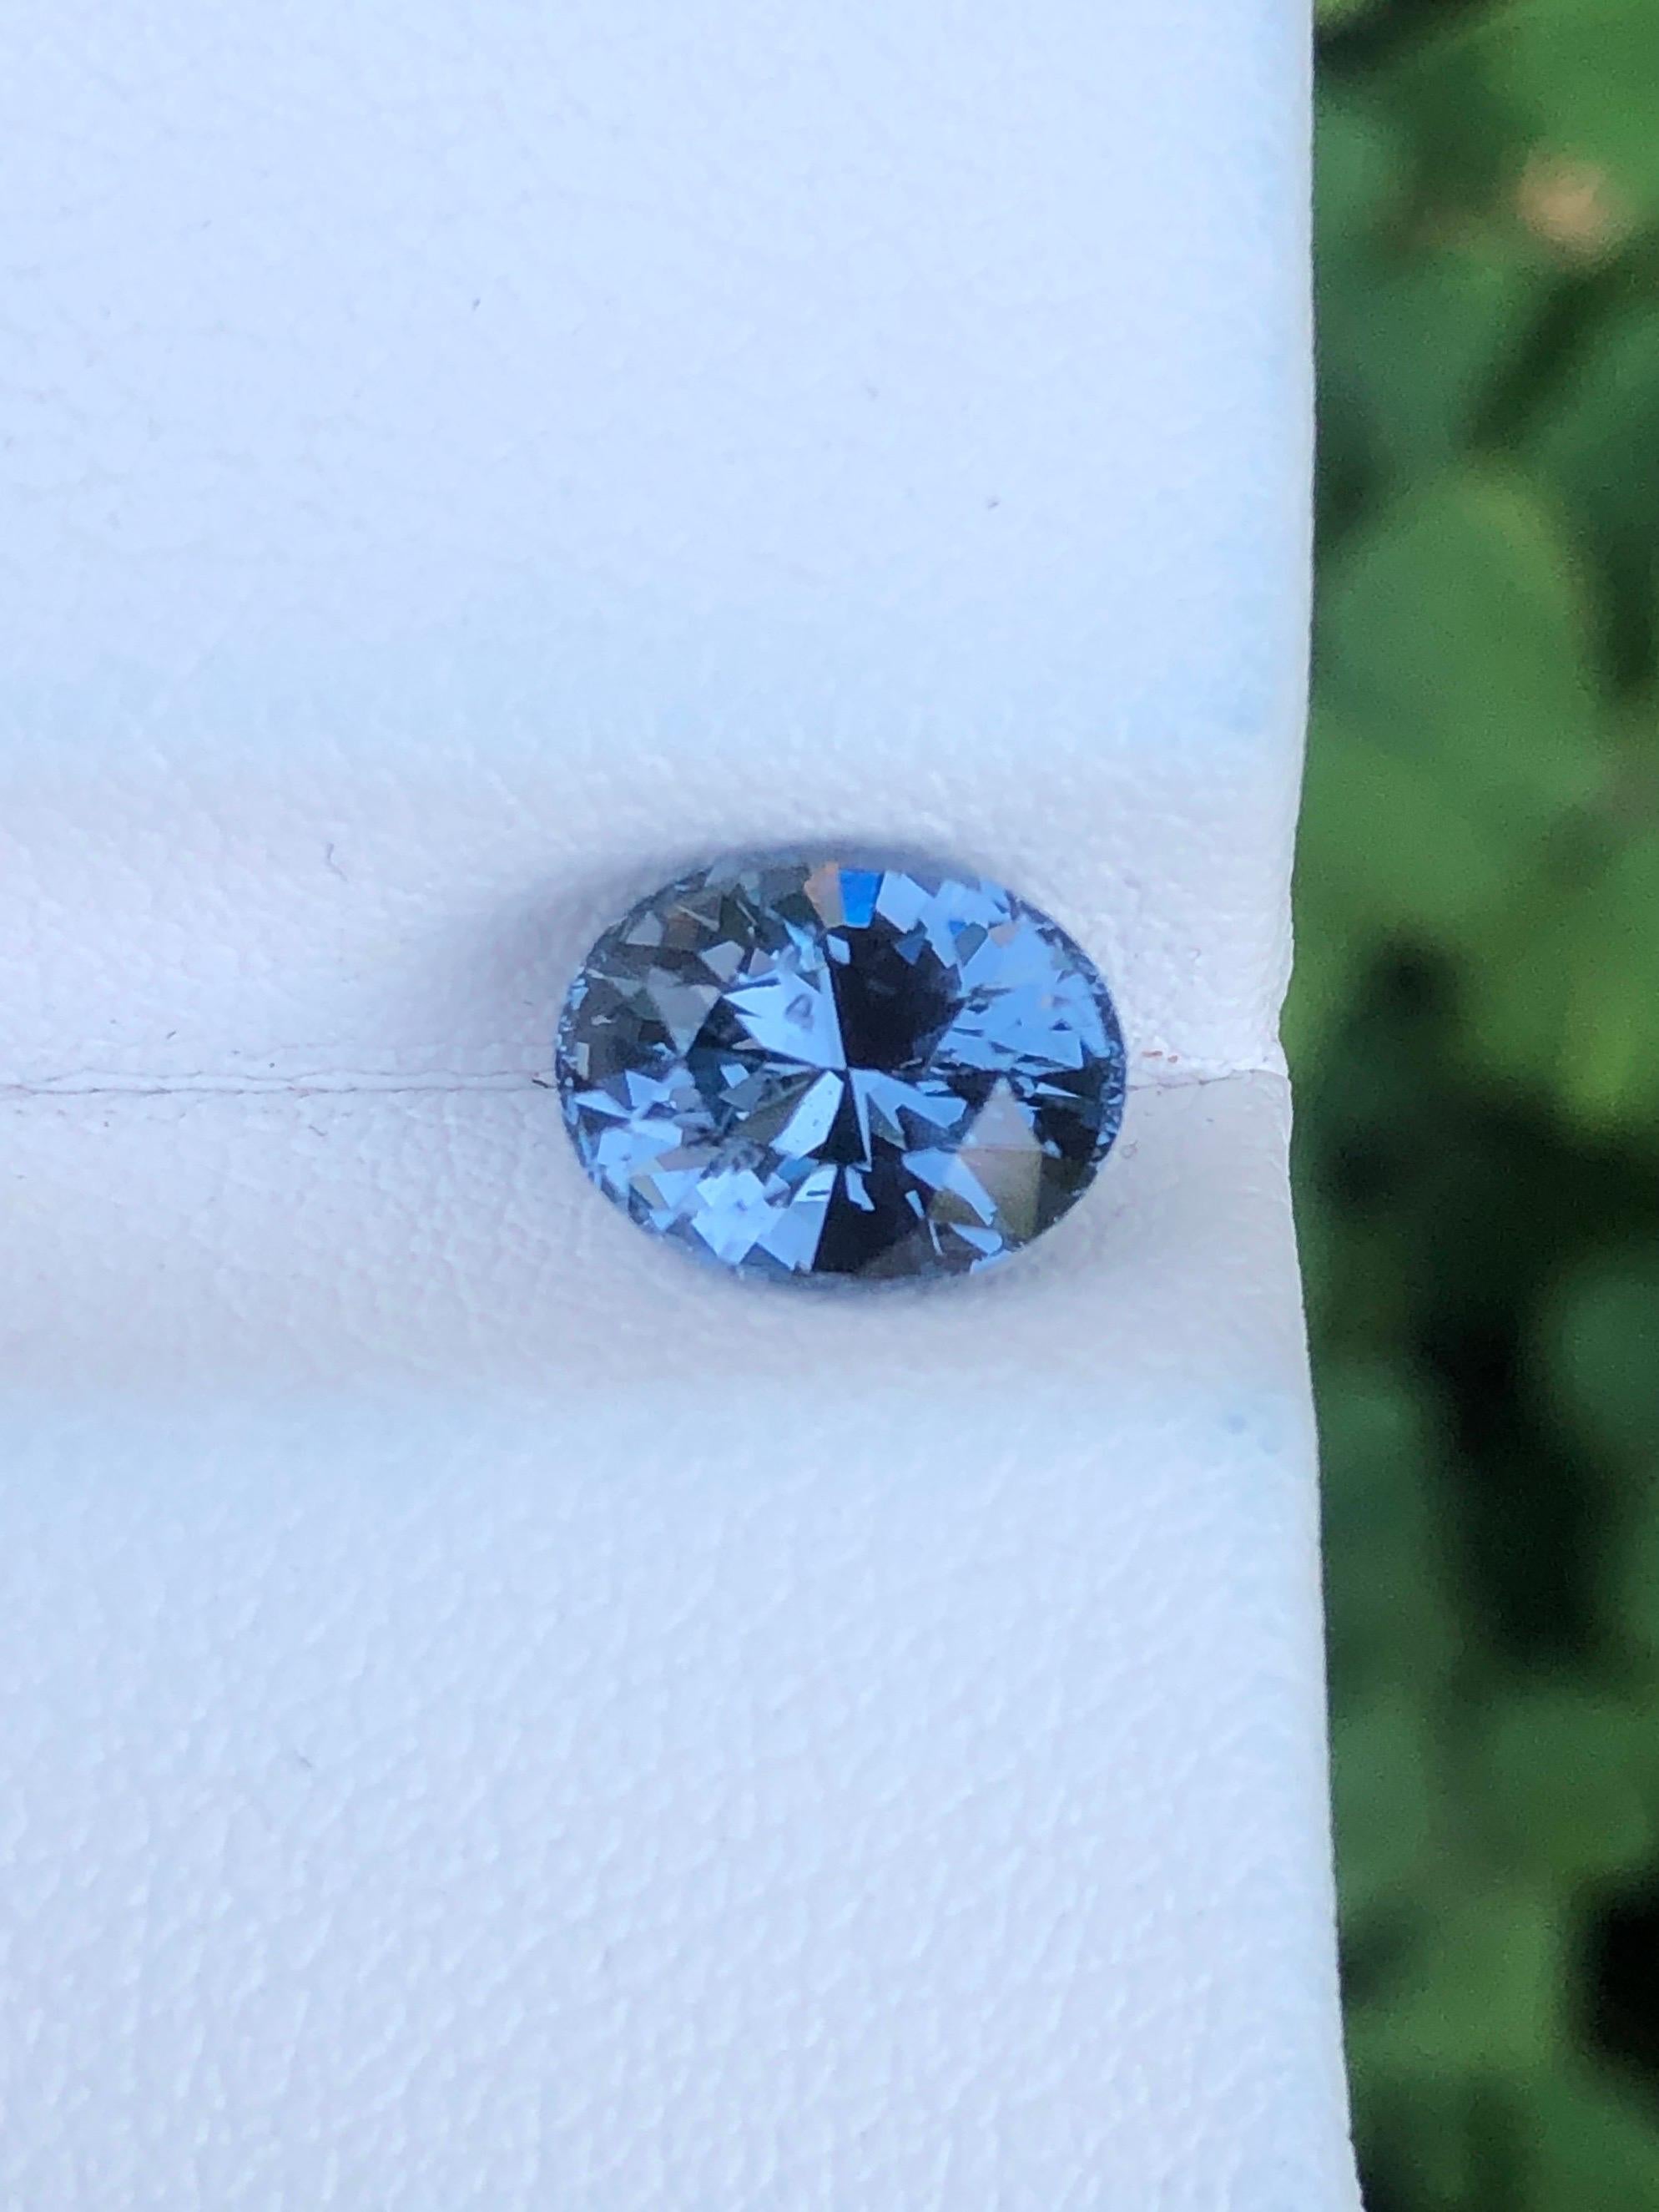 Introducing our stunning Open Oval Blue Spinel from Tanzania! With its captivating hue and exquisite cut, this gem is the epitome of elegance. Perfect for adorning a ring, its beauty will mesmerize all who behold it. Elevate your jewelry collection